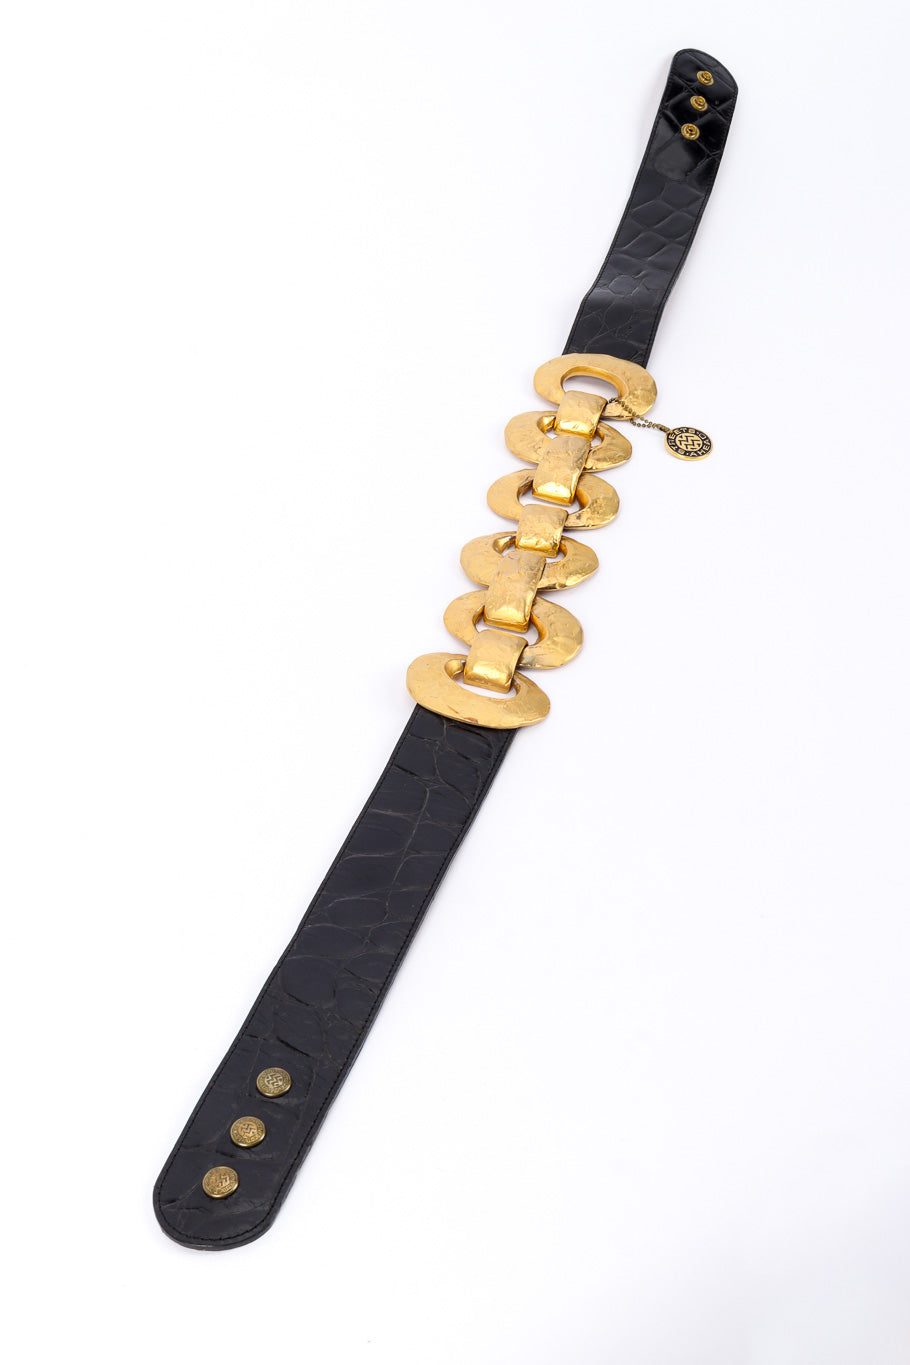 Hammered Ring Link Belt by Streets Ahead vertical @recessla